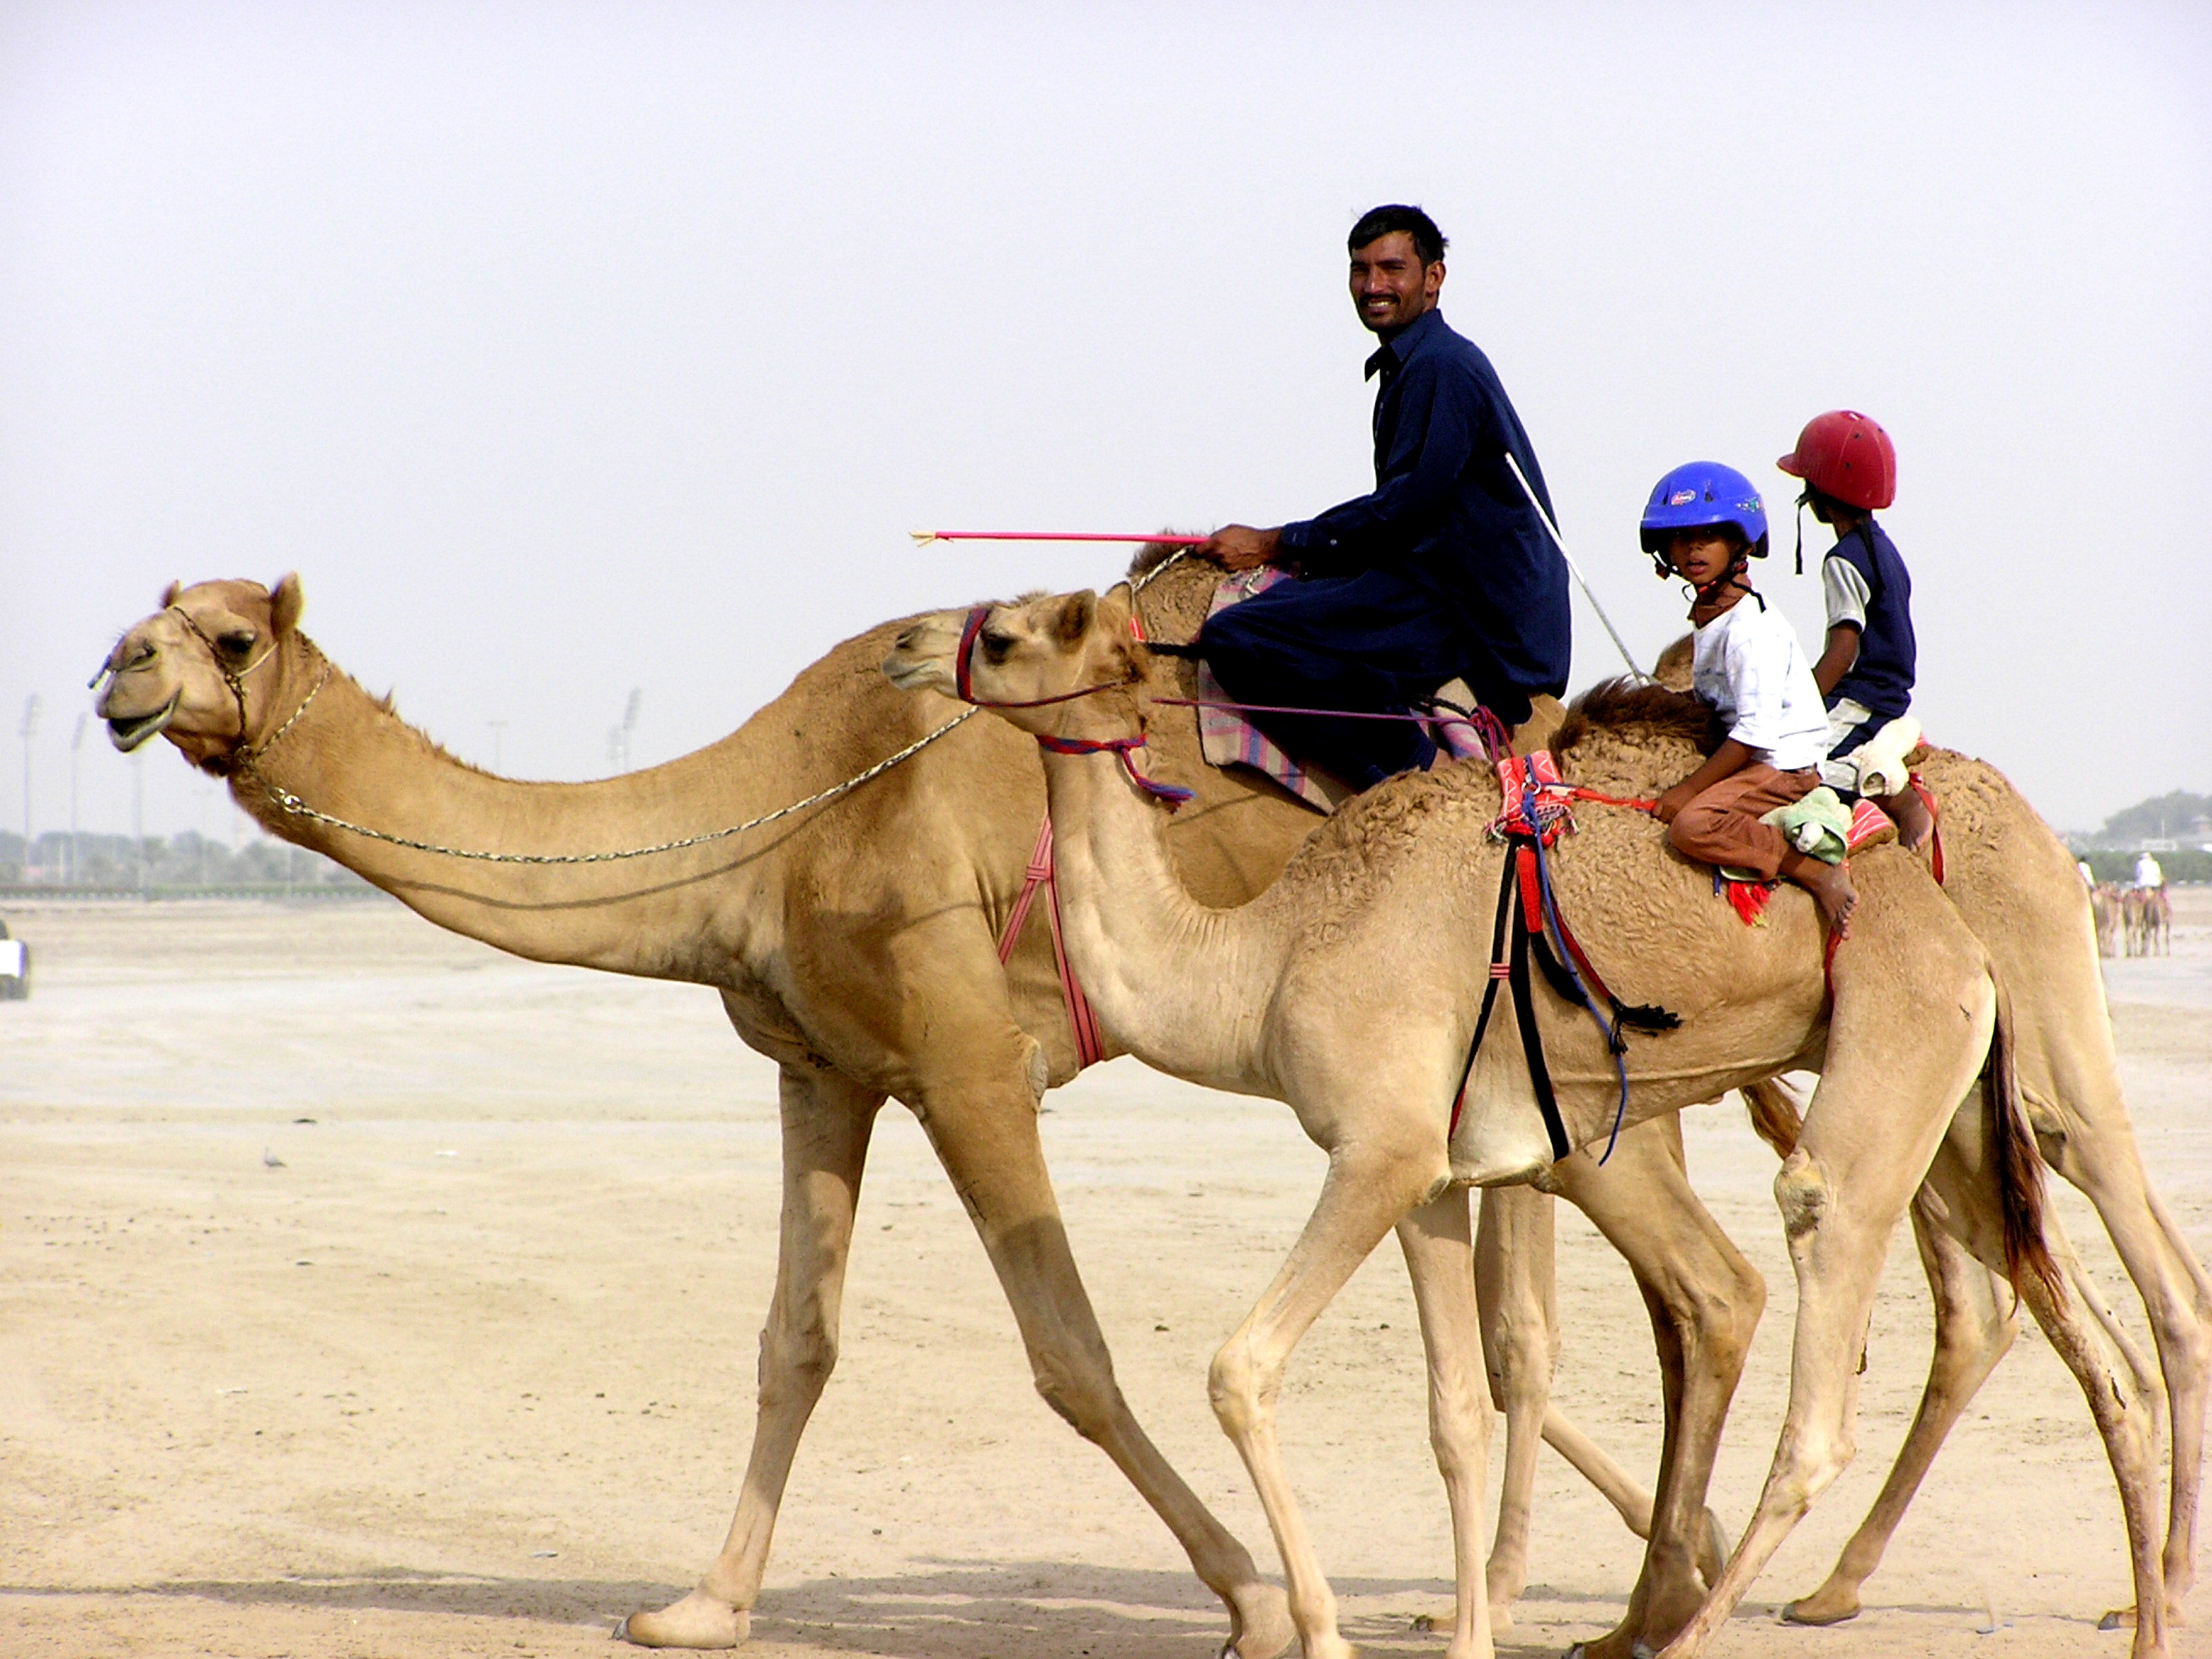 Children Camel Riders (children like this become camel riders after ...